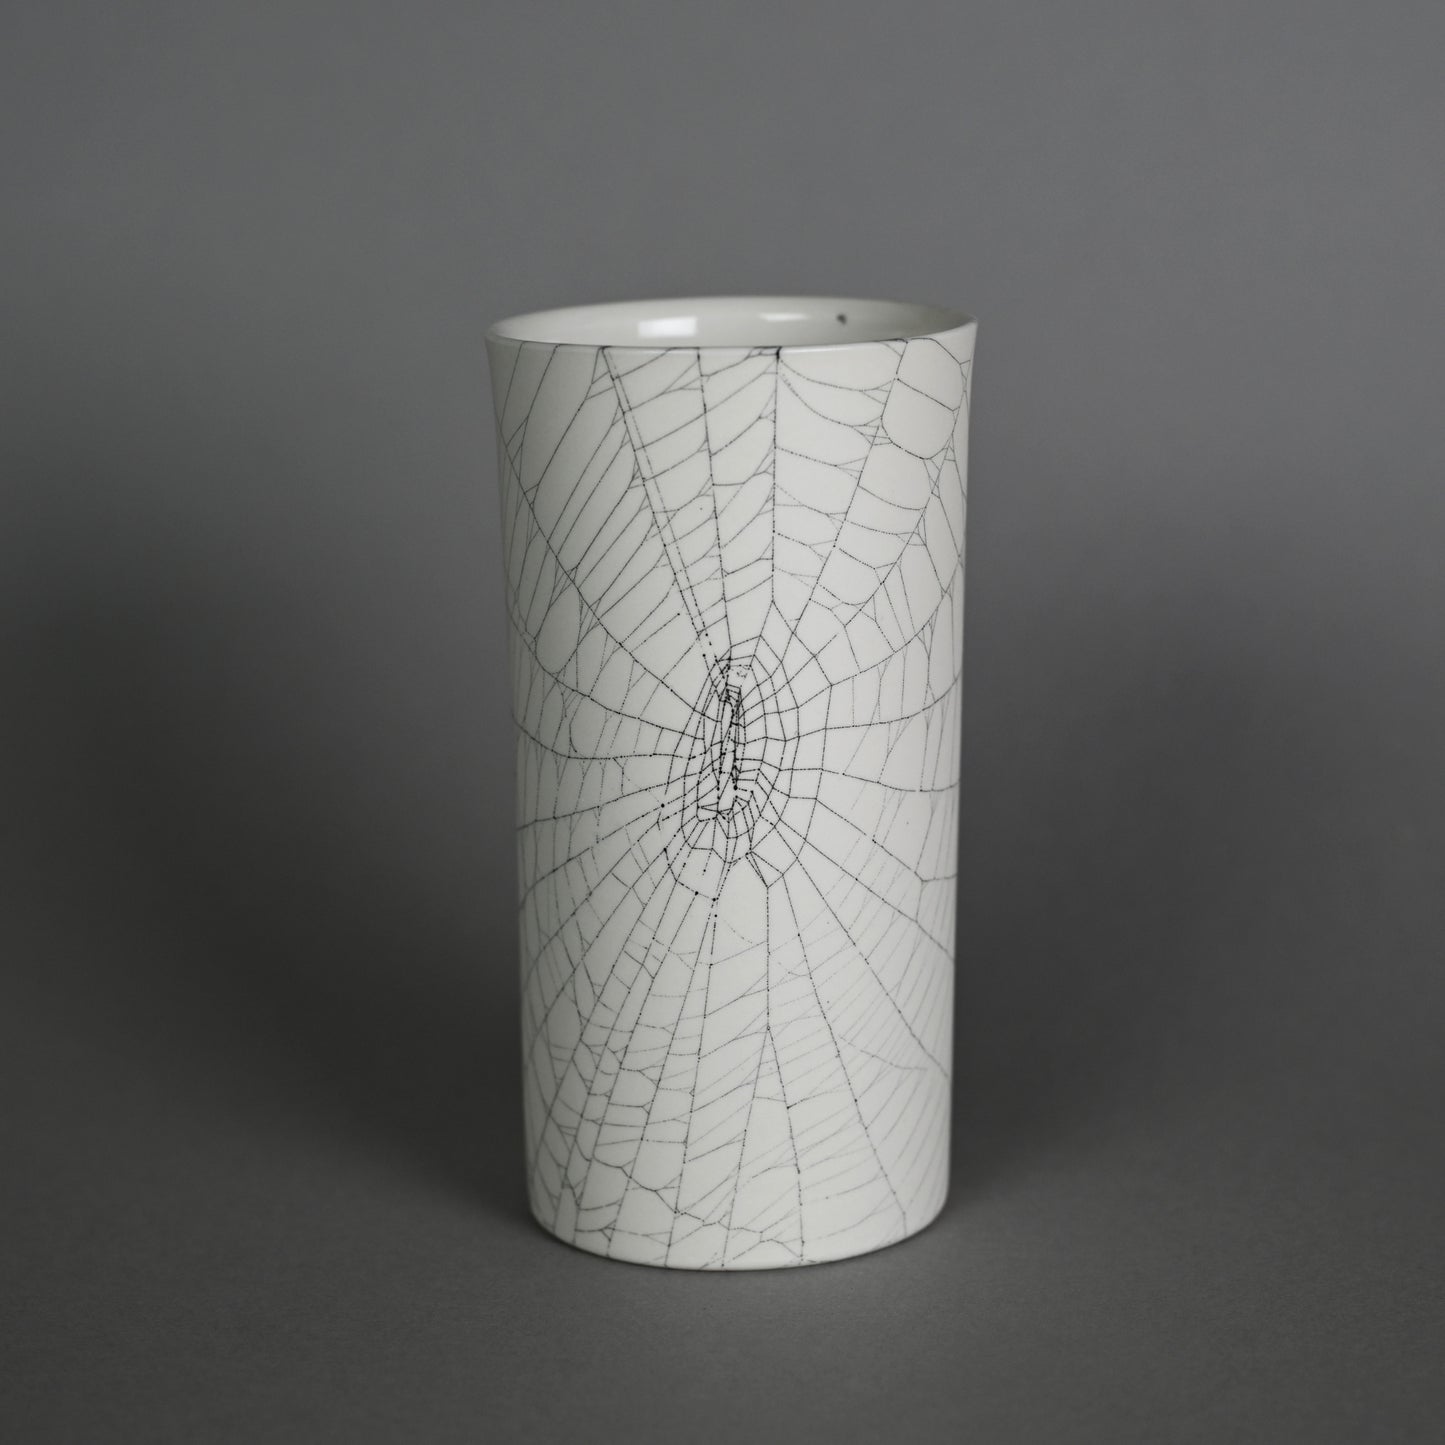 Web on Clay (190), Collected September 24, 2022